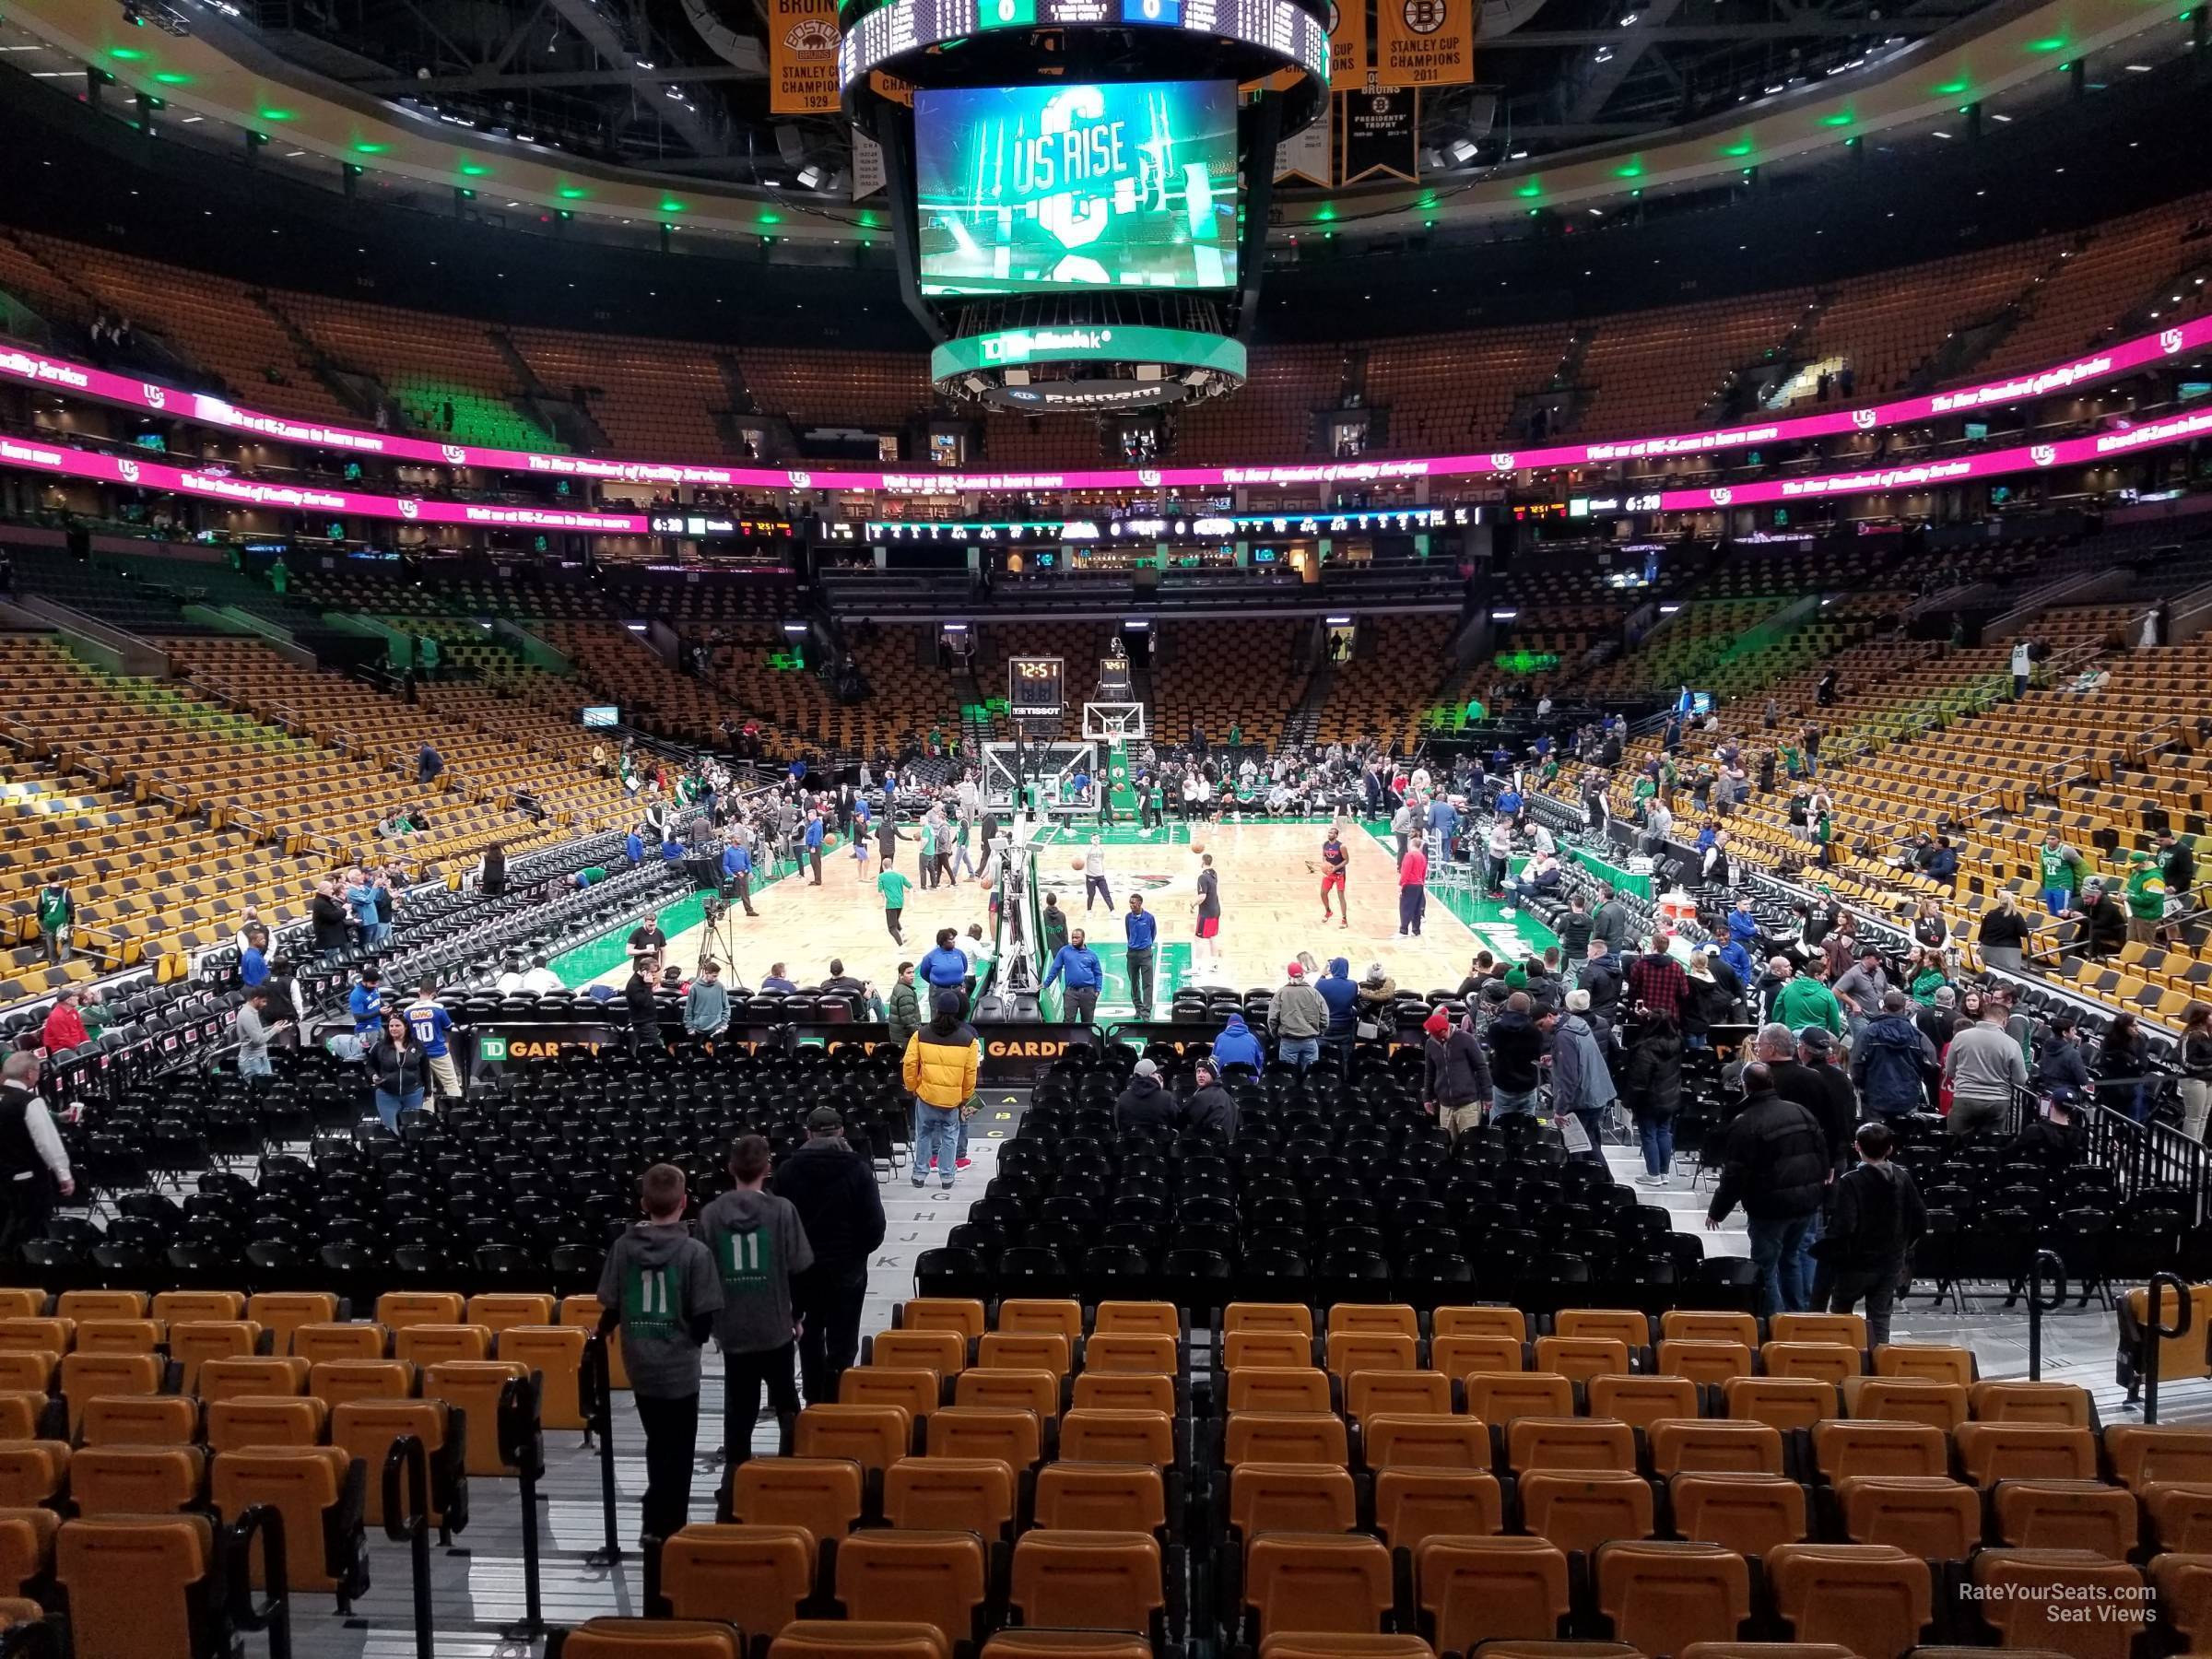 loge 6, row 13 seat view  for basketball - td garden